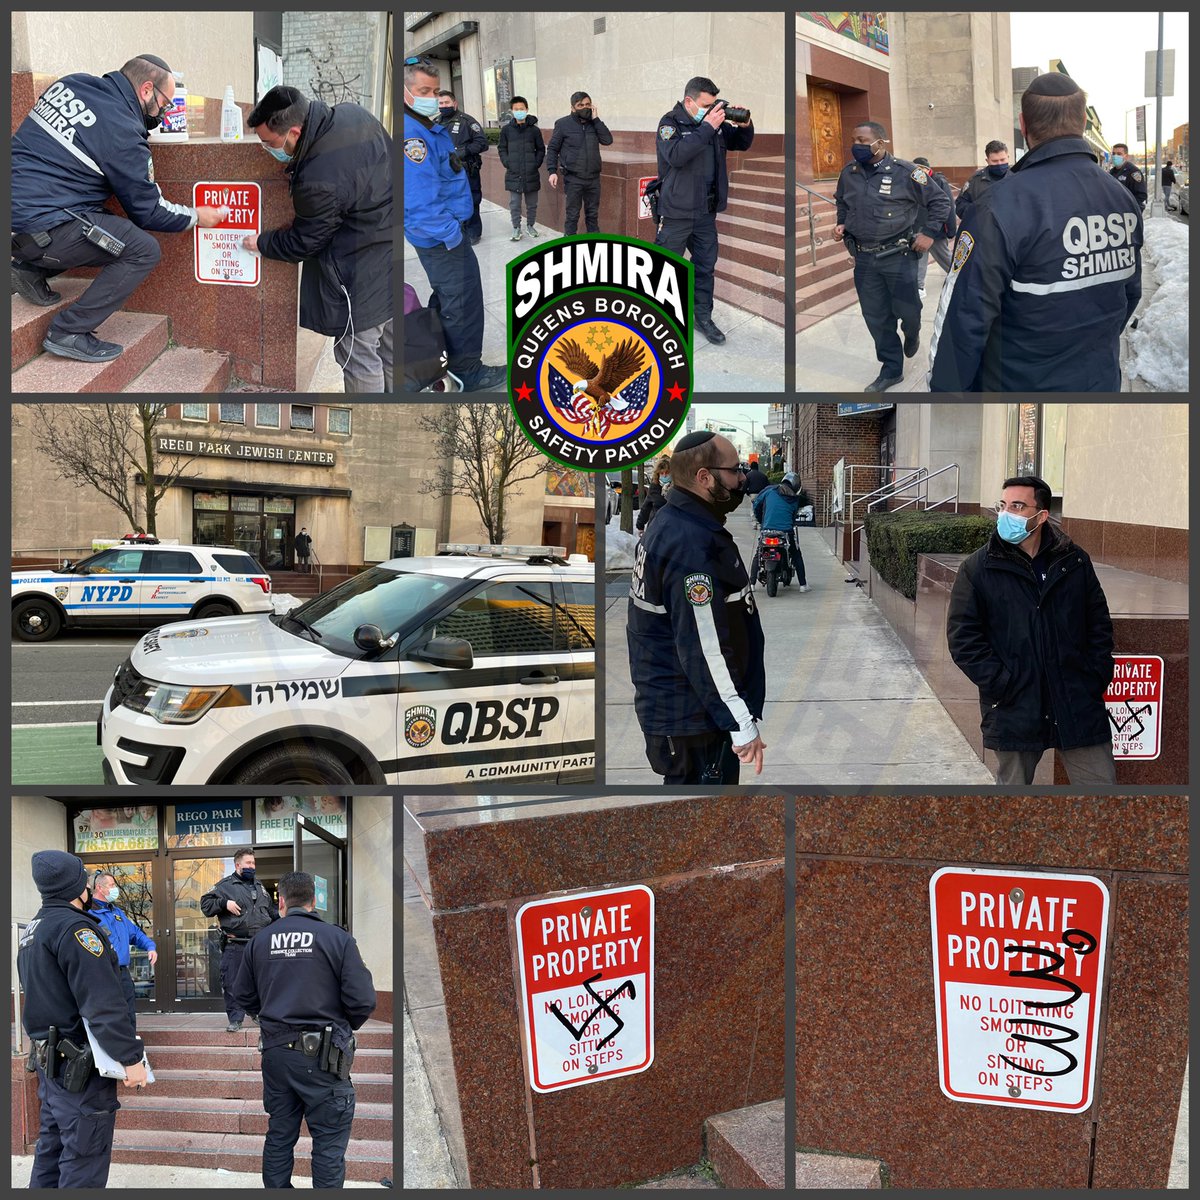 Today our Dispatcher received a hotline call from a community member In regards to a swastika written on a synagogue in Forest Hills. Thanks @NYPD112Pct for the quick response investigating this heinous act of hate. #StopTheHate @NYPDHateCrimes